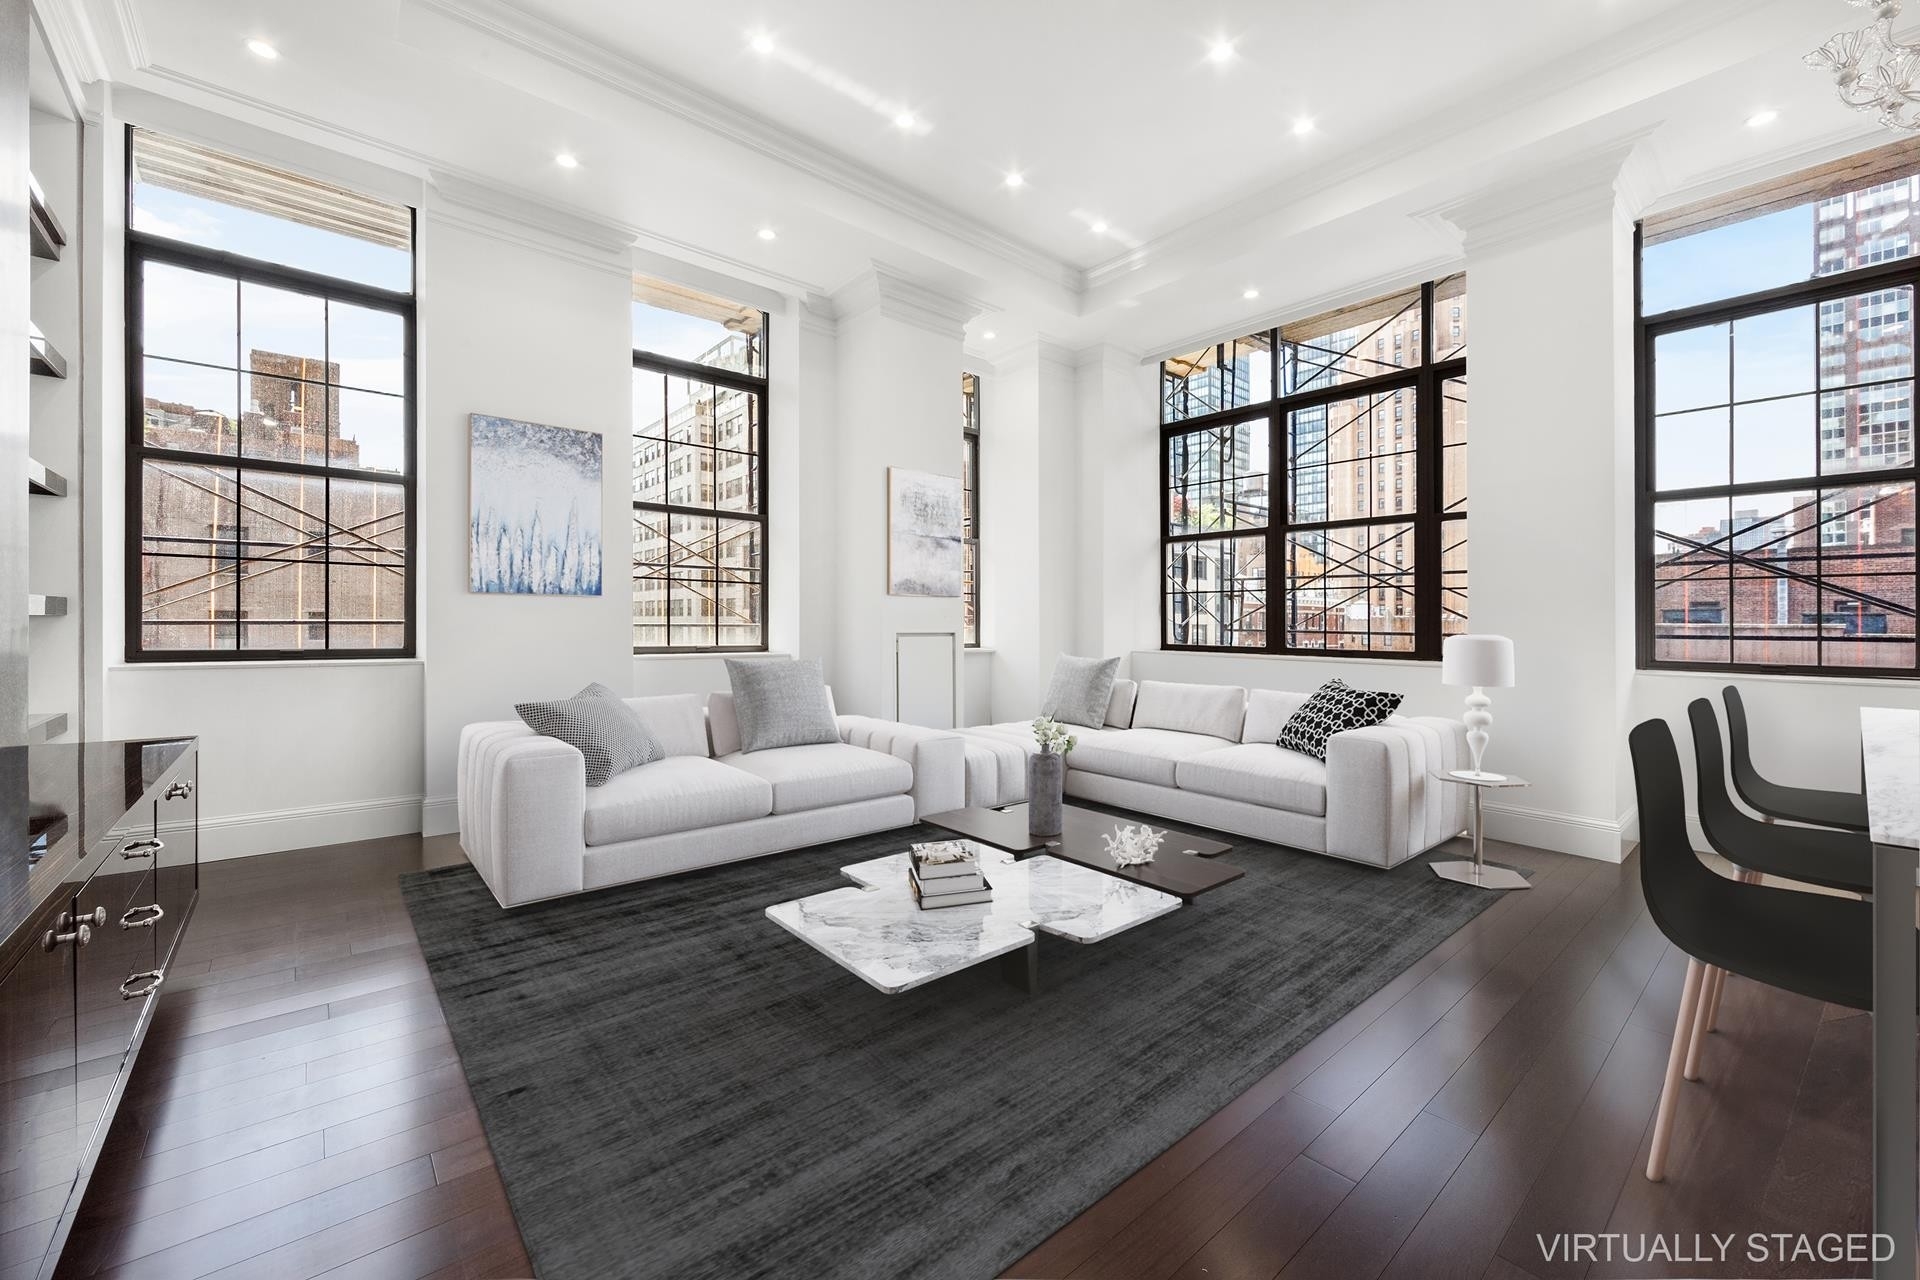 Condominium for Sale at The Beekman Regent, 351 E 51ST ST, L6B Turtle Bay, New York, NY 10022